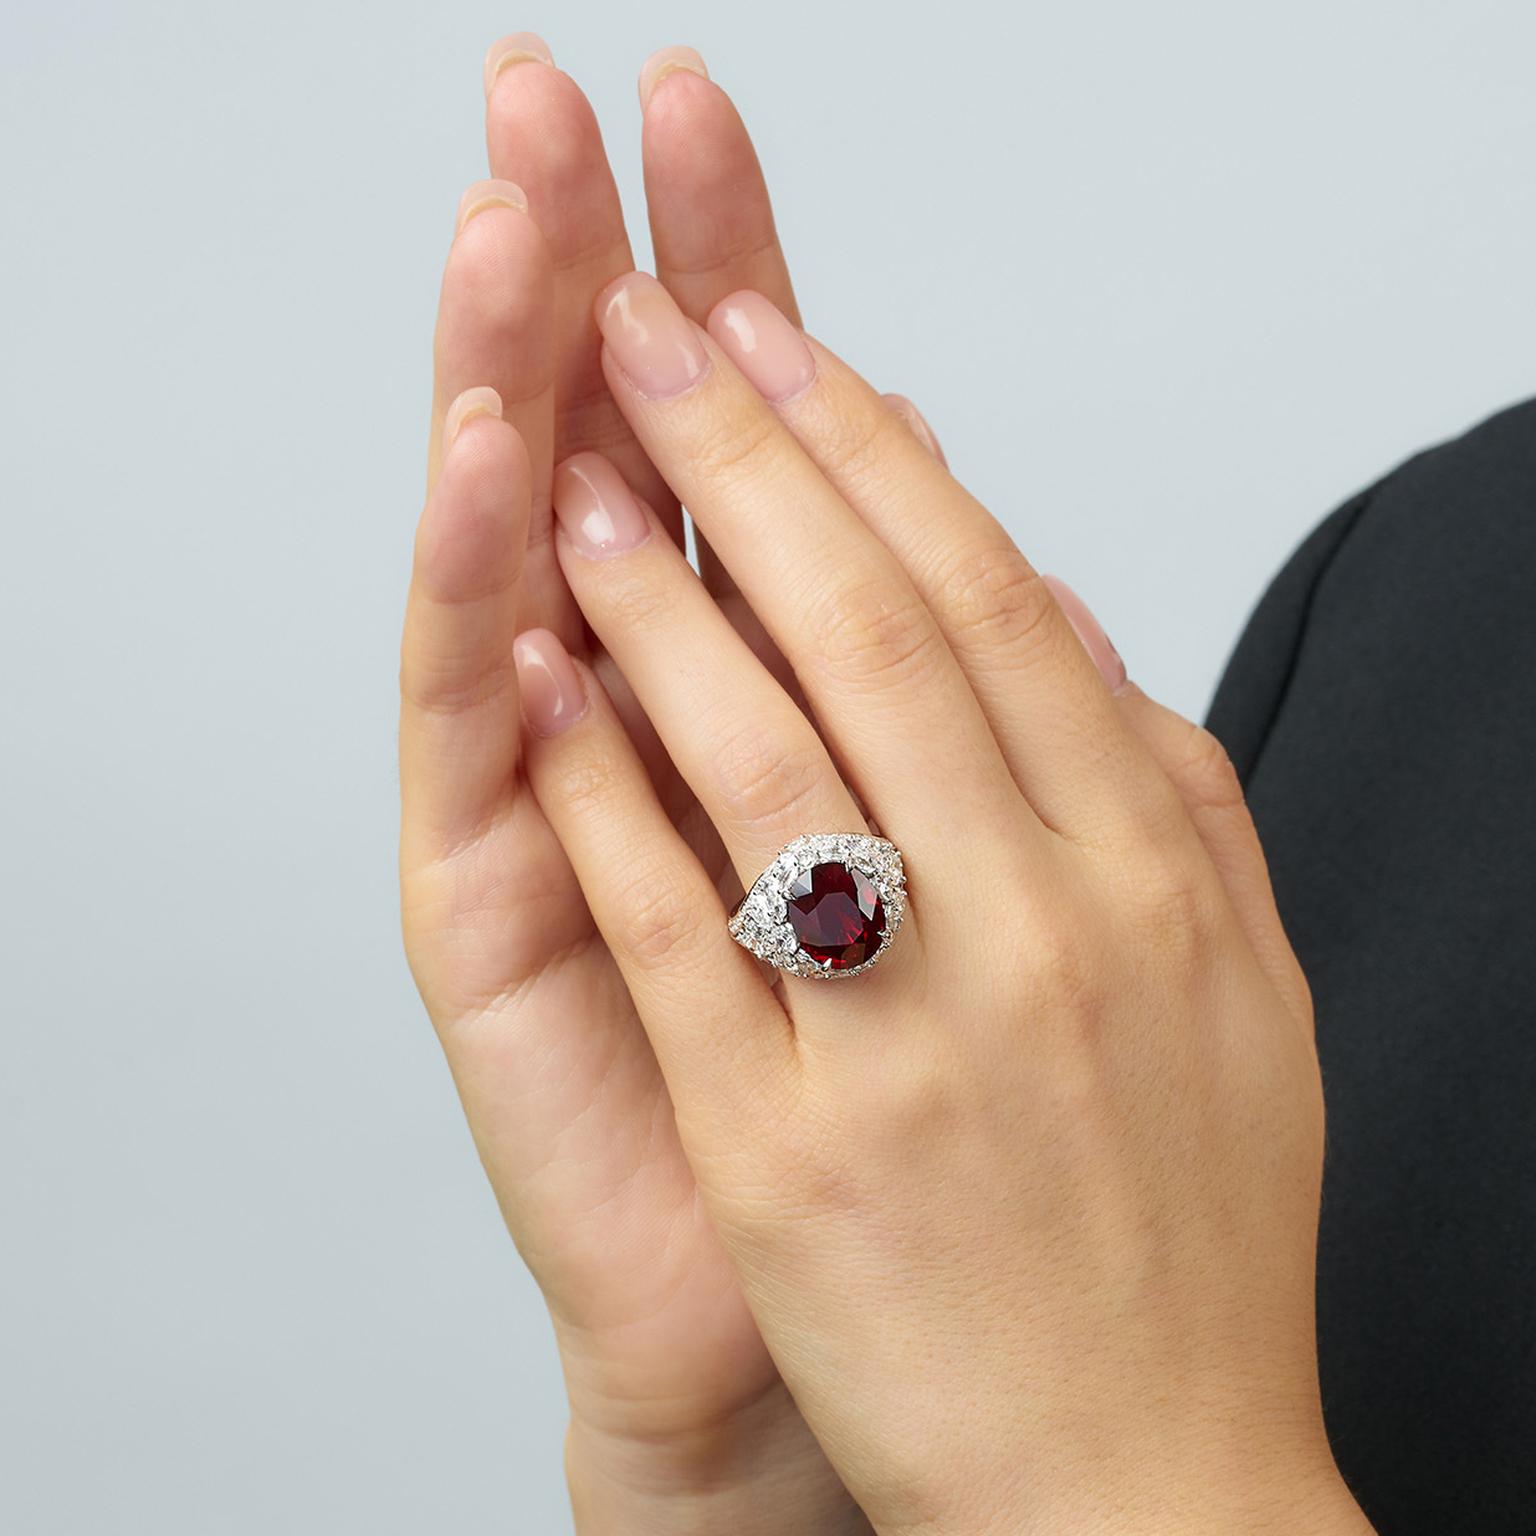 Lot 588 Ruby and diamonds ring Phillips auction on model